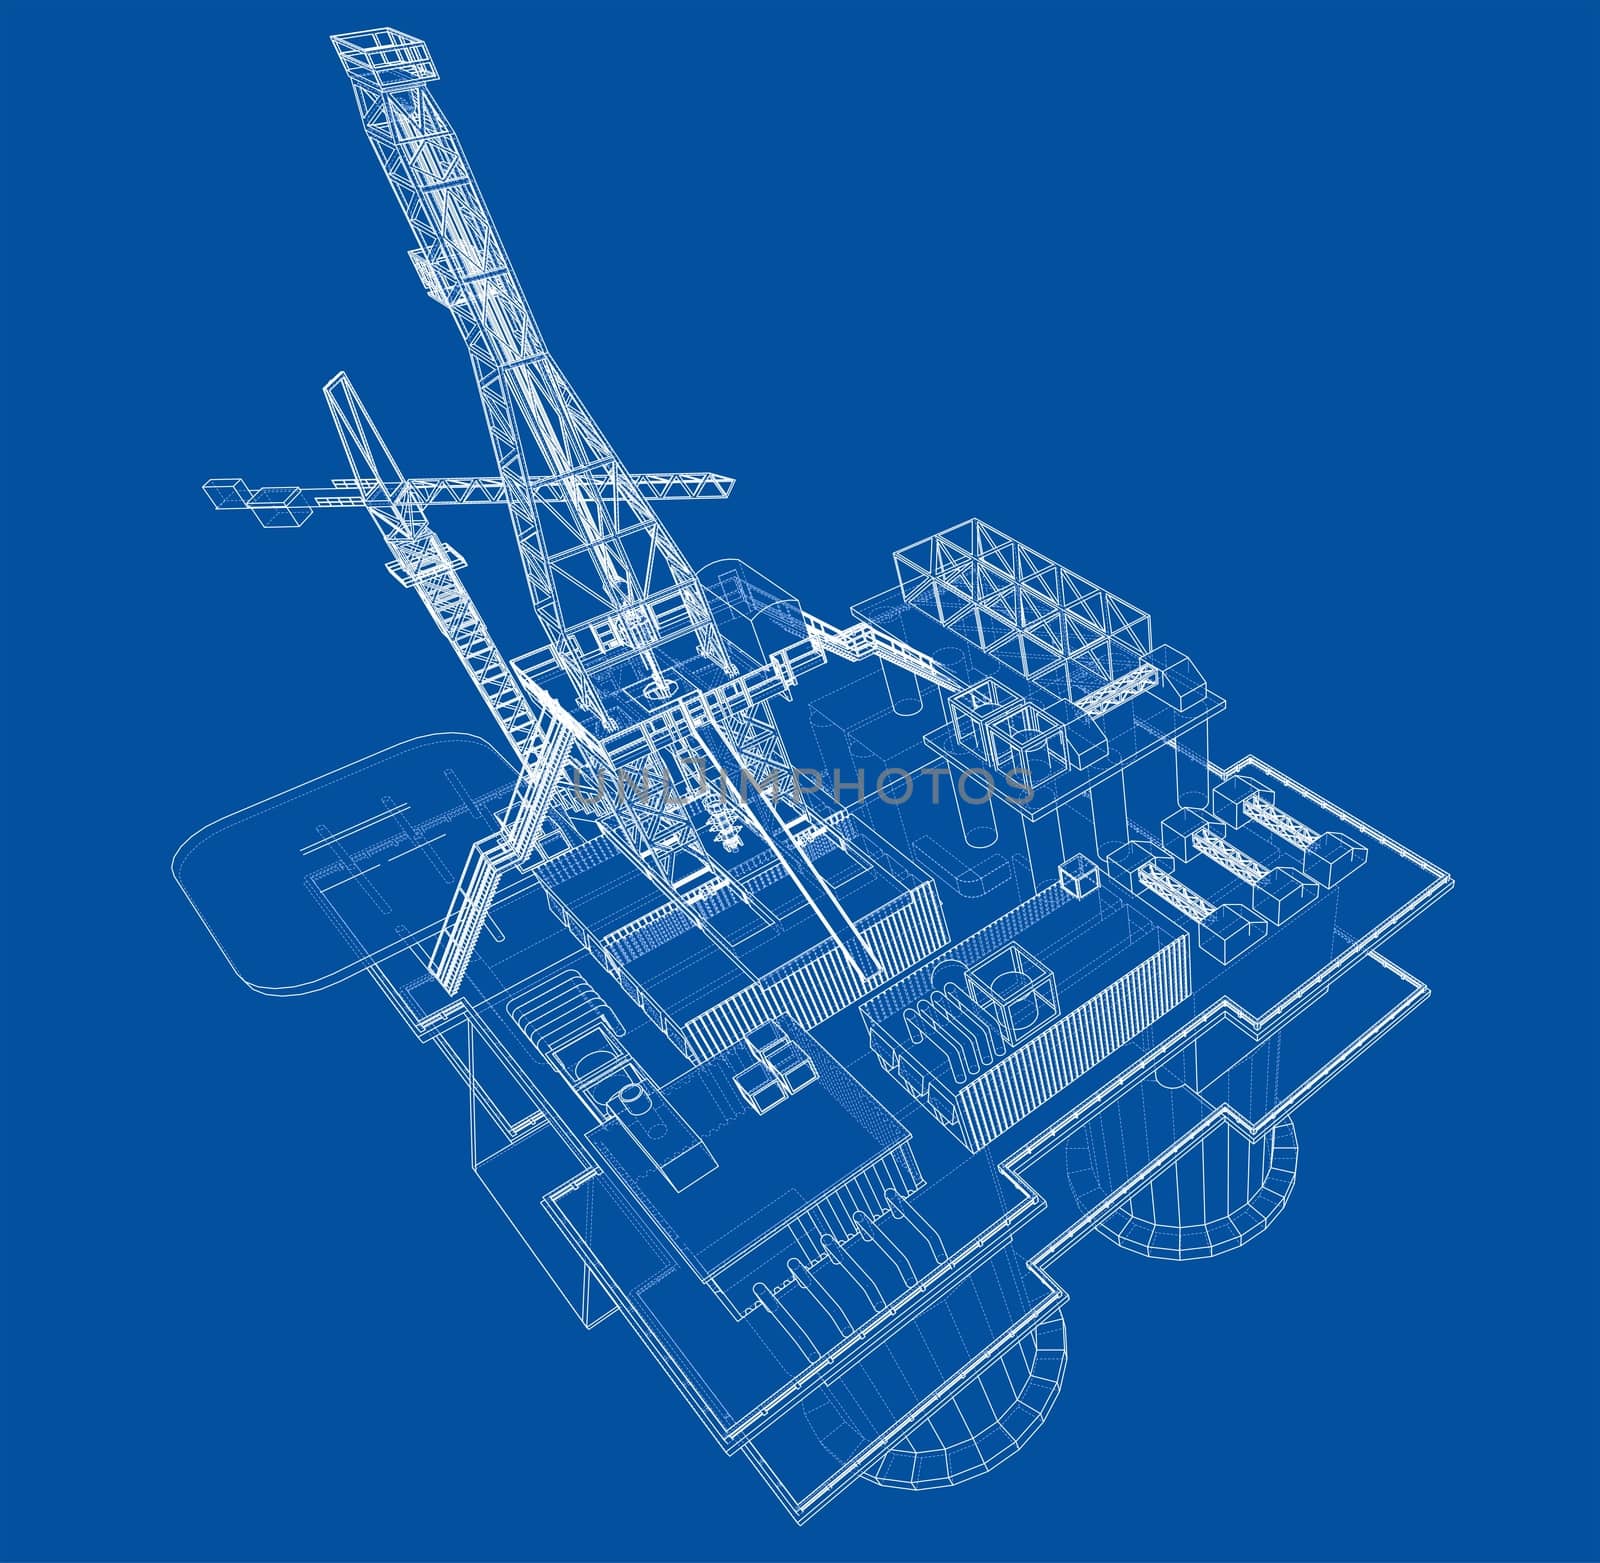 Offshore oil rig drilling platform concept by cherezoff